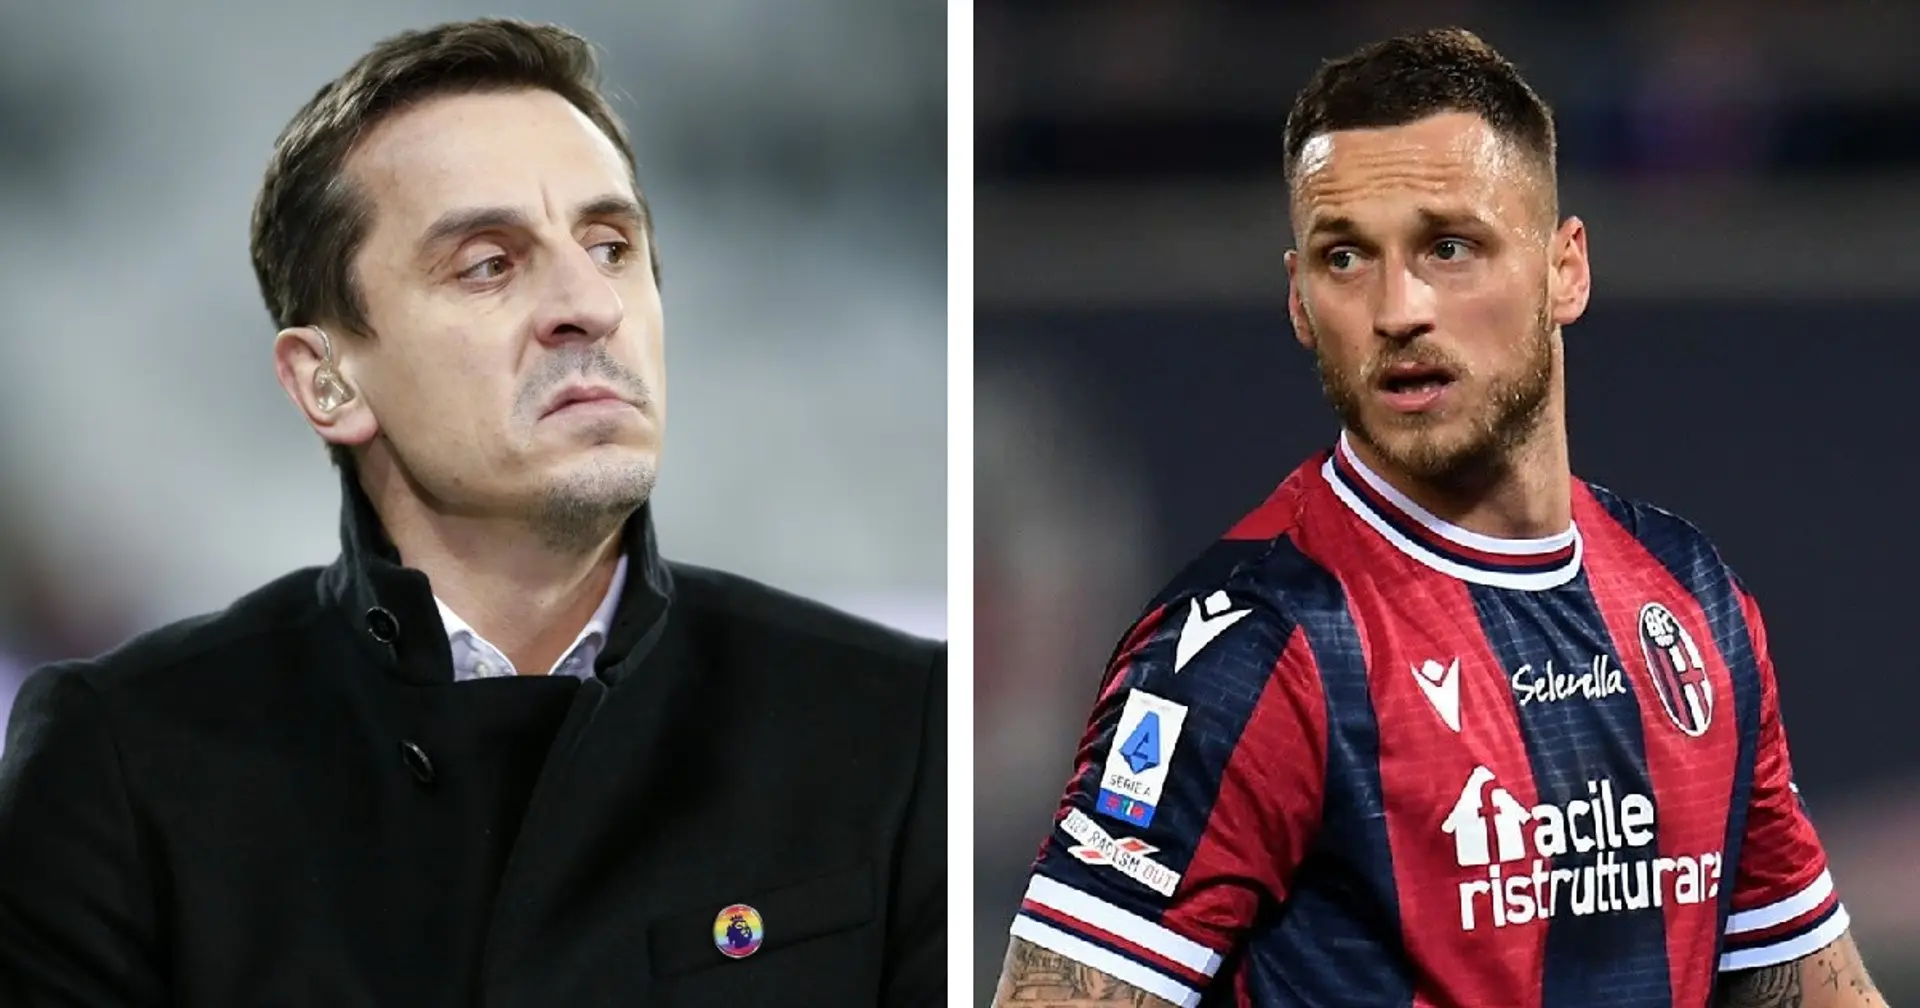 'It’s got to the point where I don’t even want to talk about it anymore': Neville responds to Arnautovic links